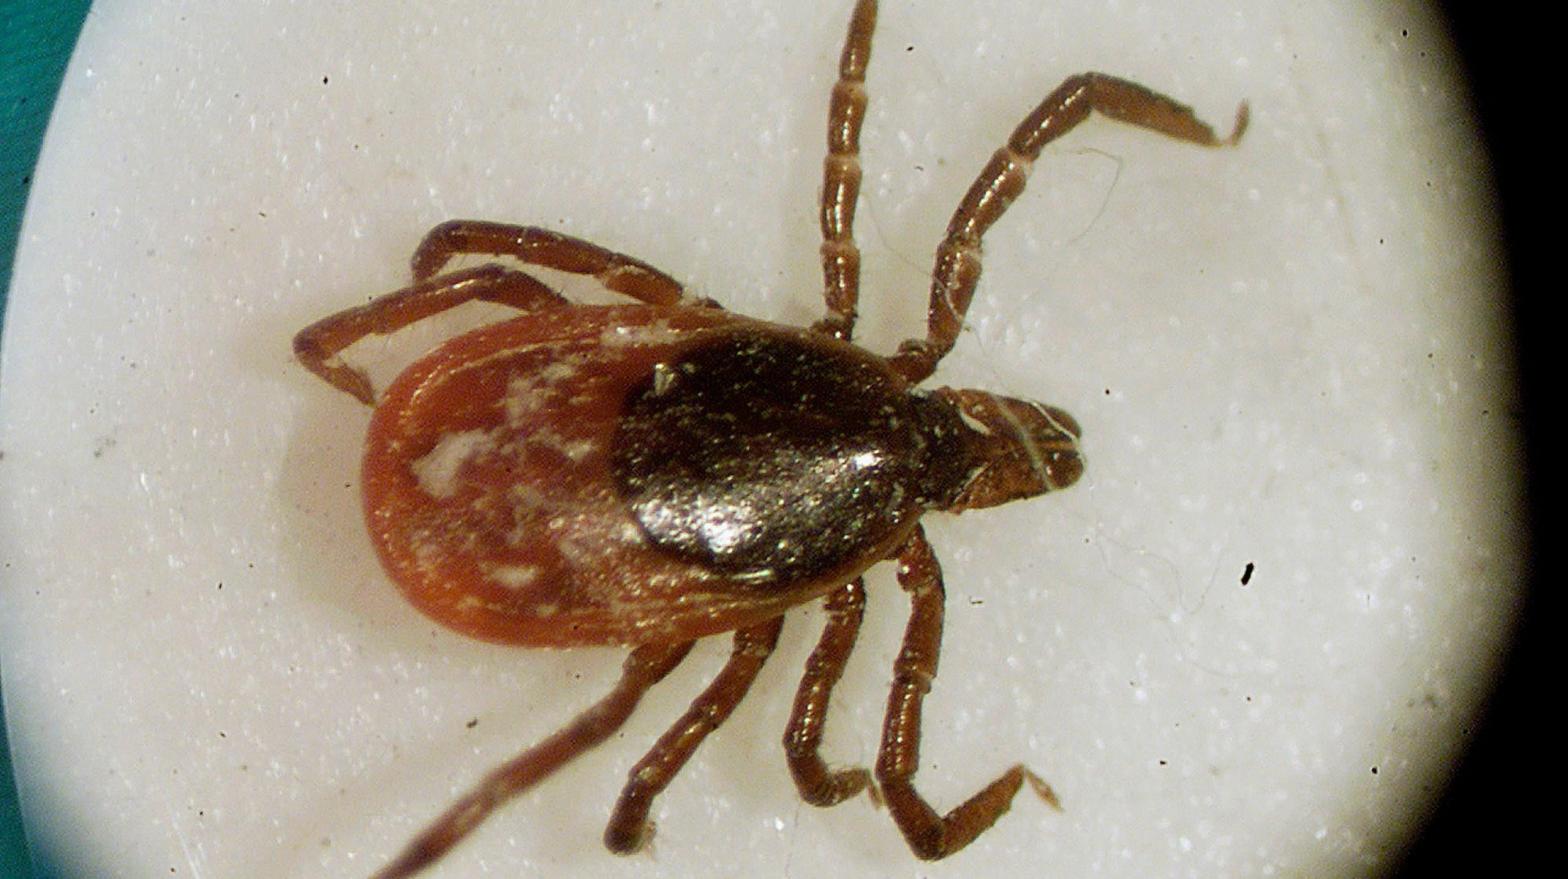 A deer tick (Ixodes scapularis), the most common vector of Lyme disease in the U.S. (Photo: Victoria Arocho, AP)